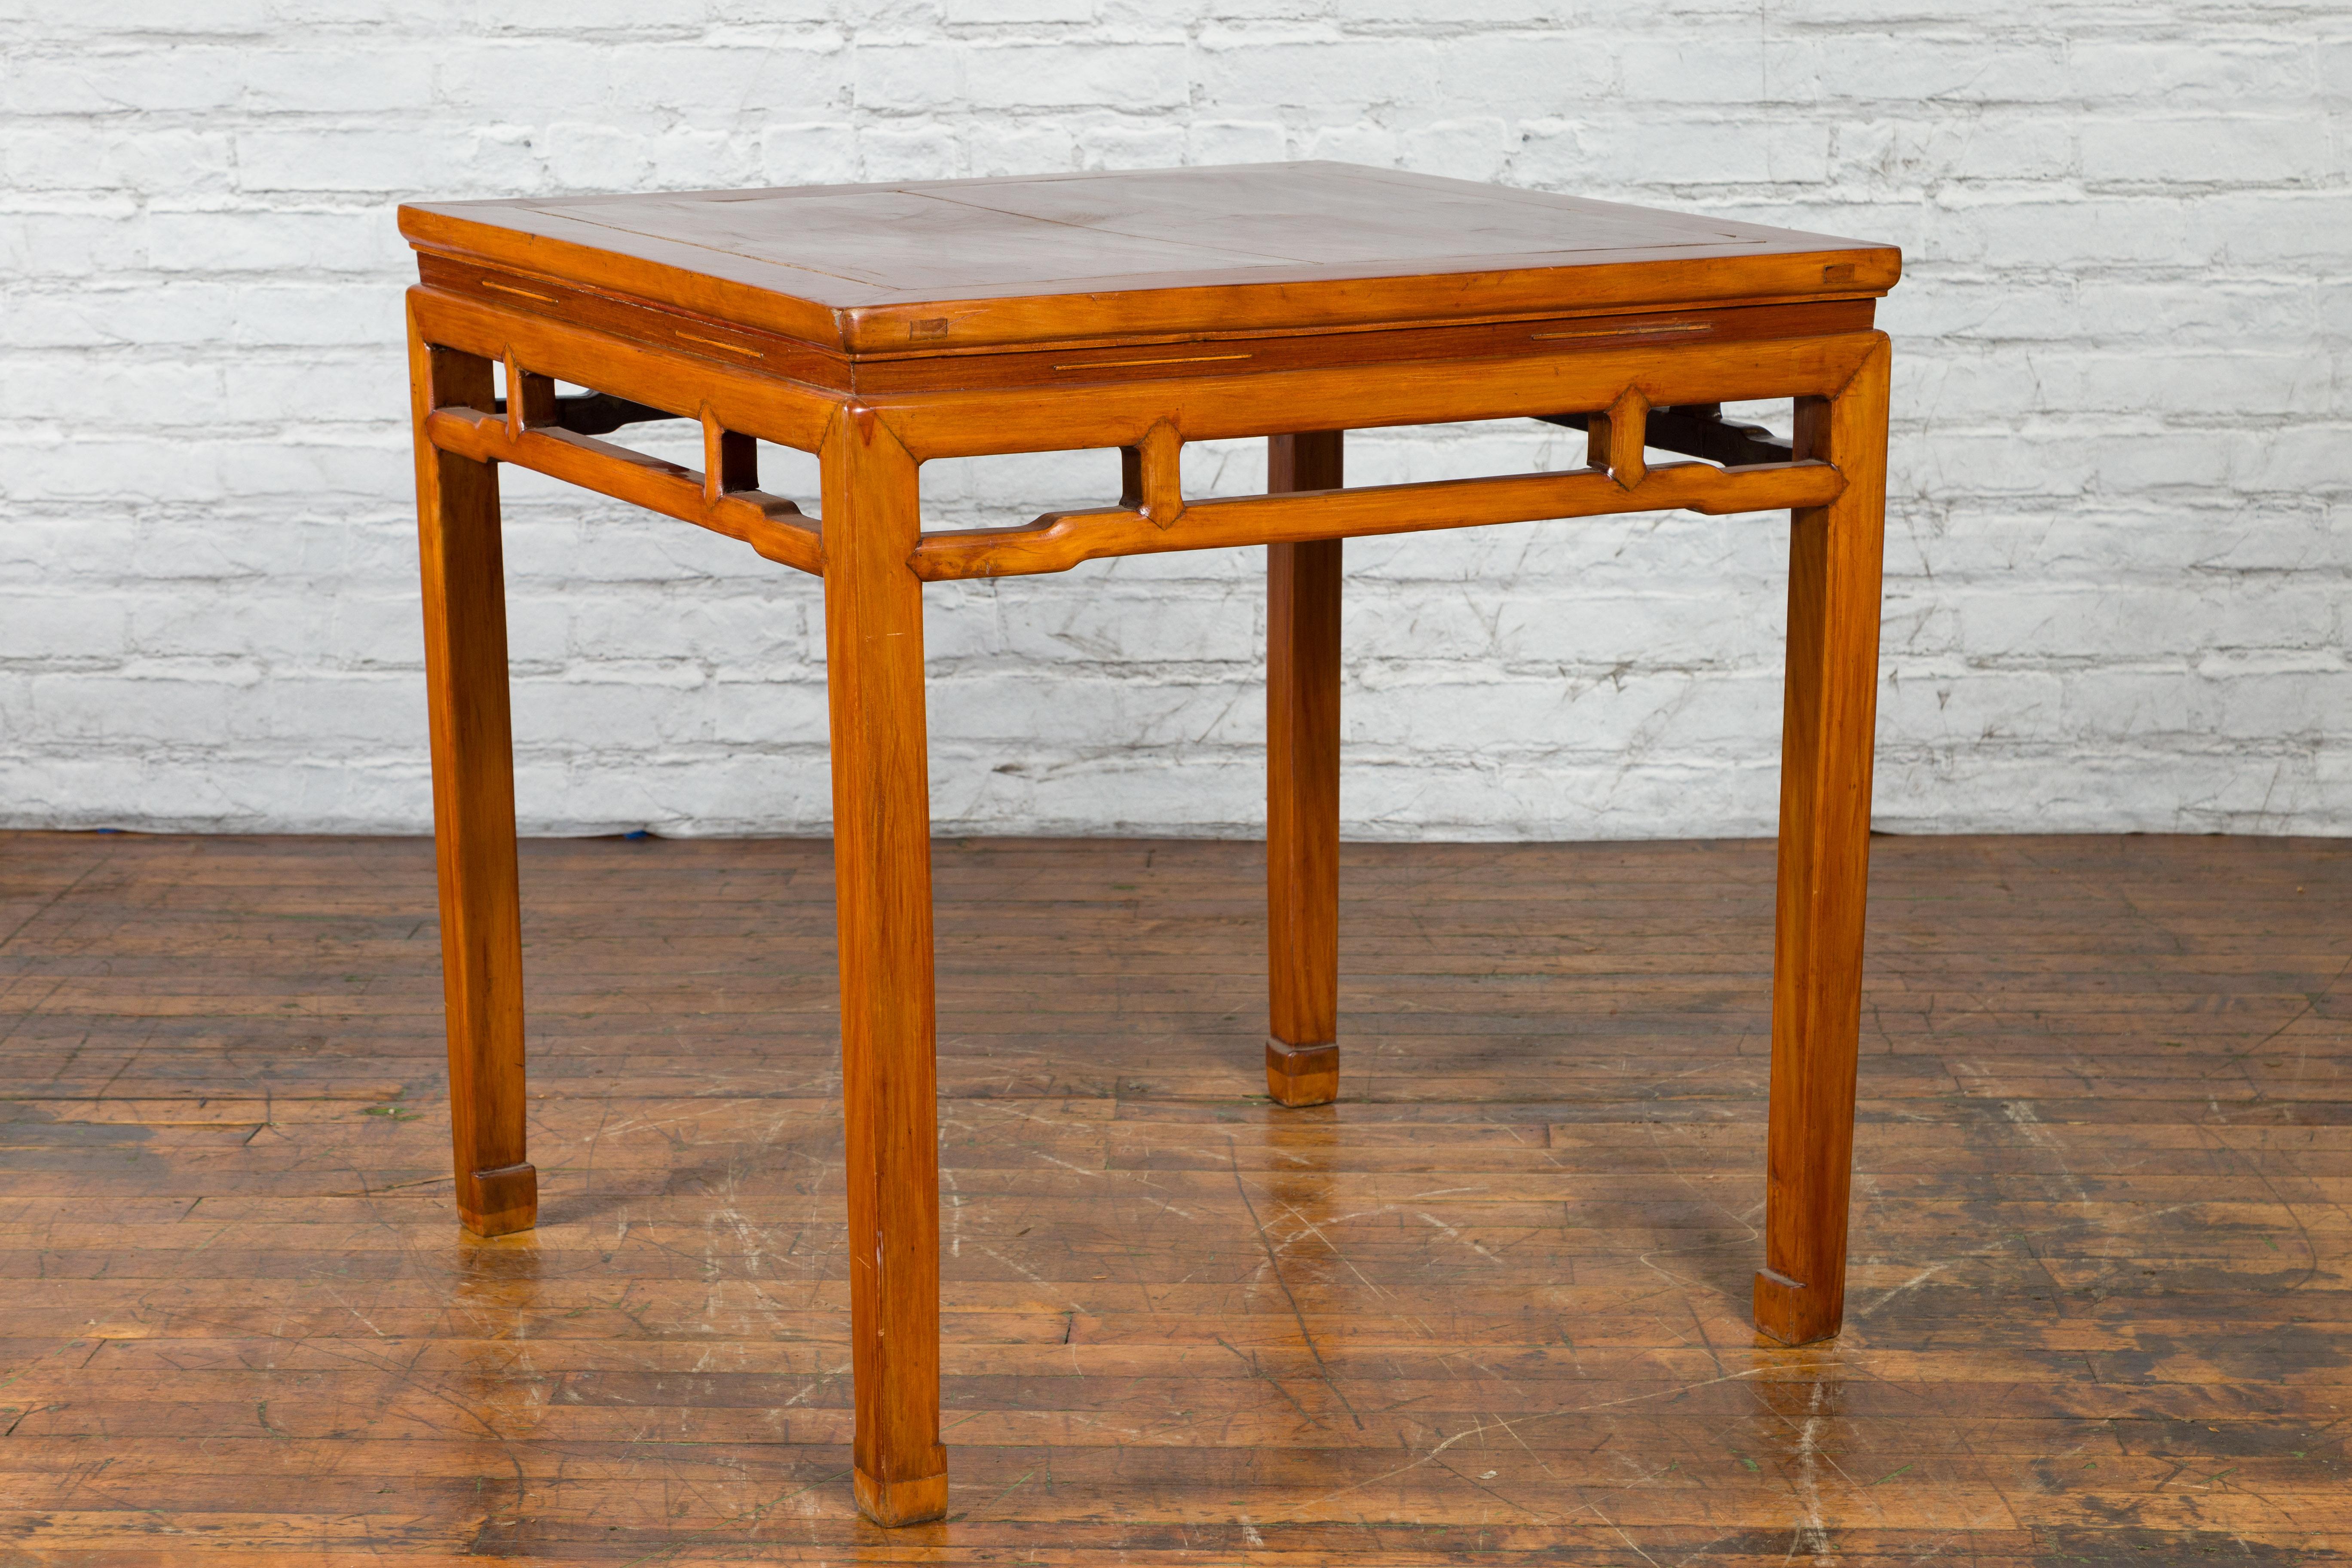 Lacquered Qing Dynasty 19th Century Table with Humpback Stretchers and Horse Hoof Legs For Sale